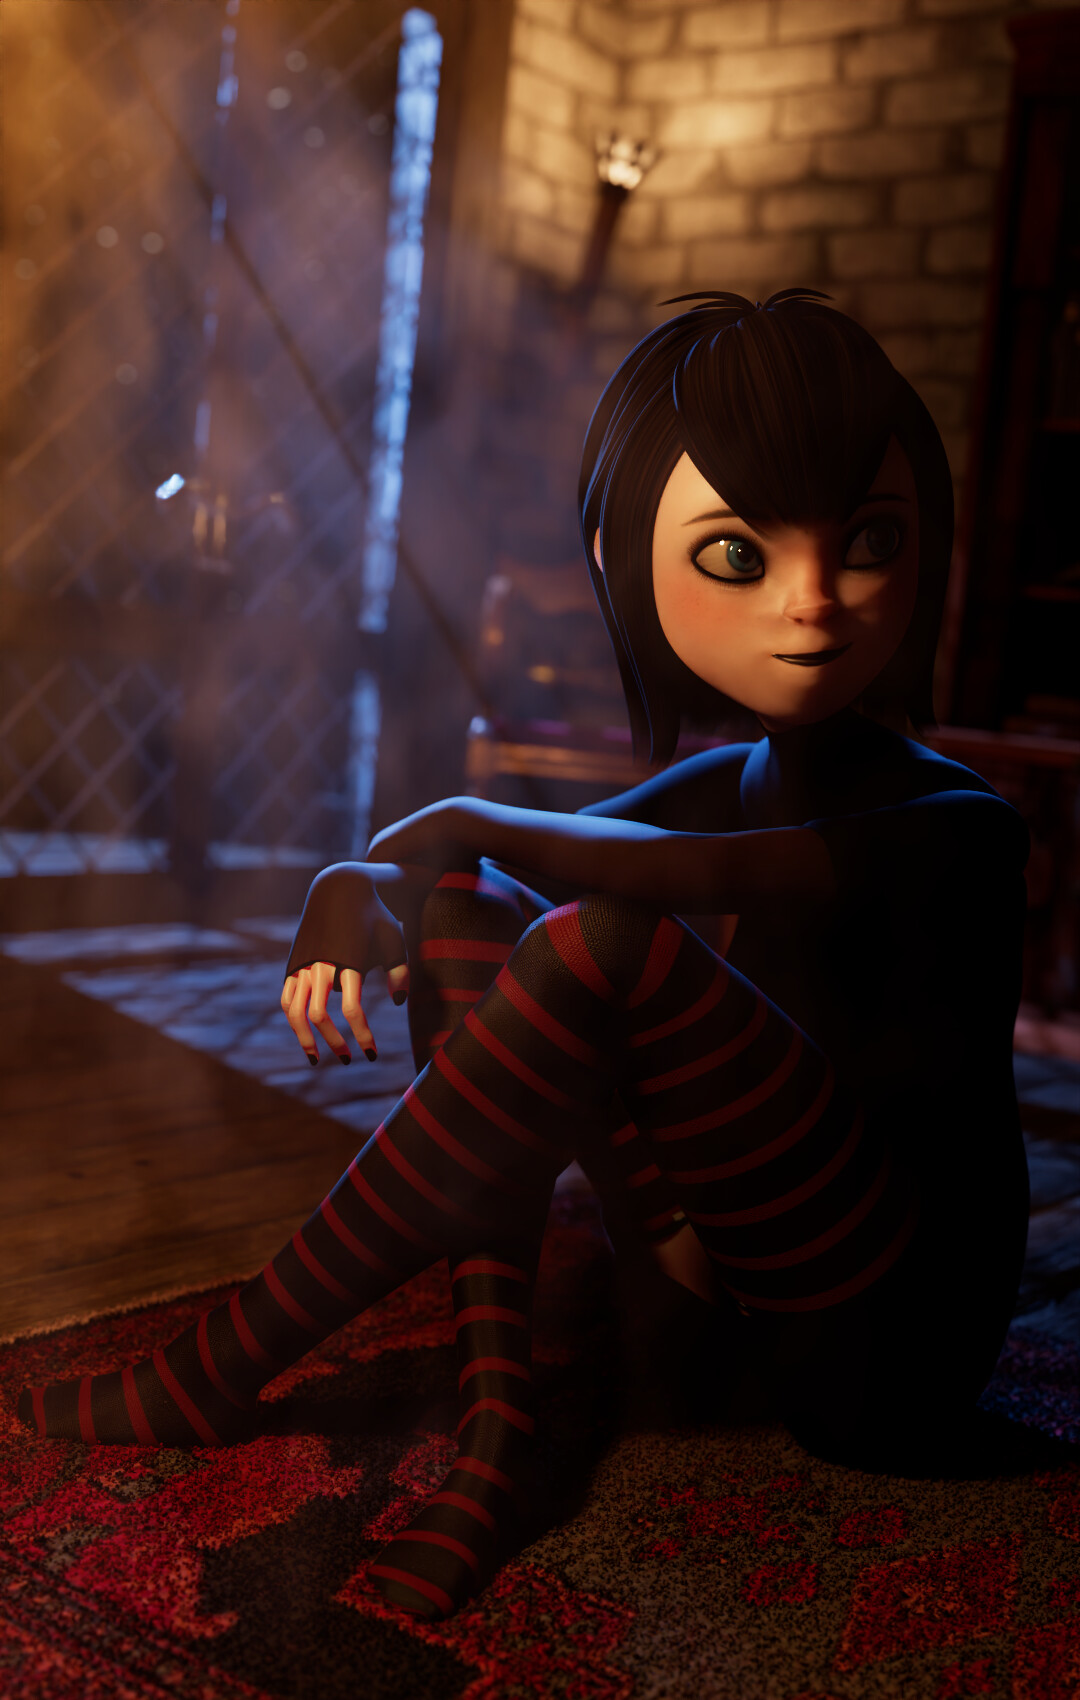 cotton williams recommends Images Of Mavis From Hotel Transylvania